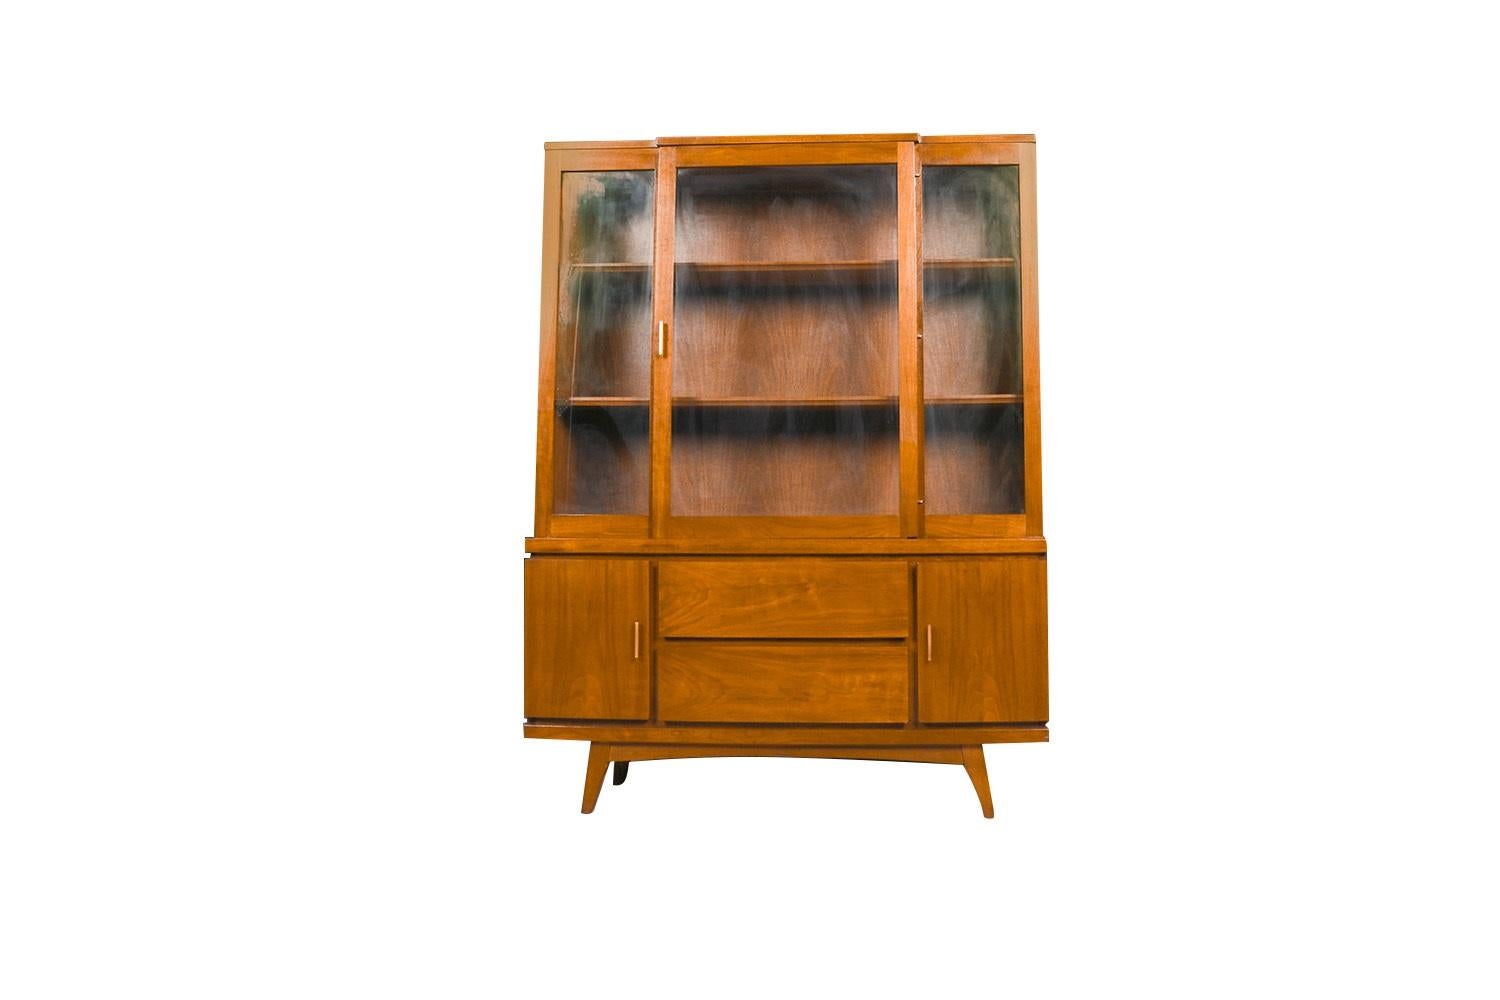 An exceedingly well-crafted, detailed, proportioned walnut China Cabinet /Hutch in great original condition. The hutch is one solid-piece, featuring one cabinet door, accented with a brass pull. Cabinet door opens to reveal a beautiful interior with